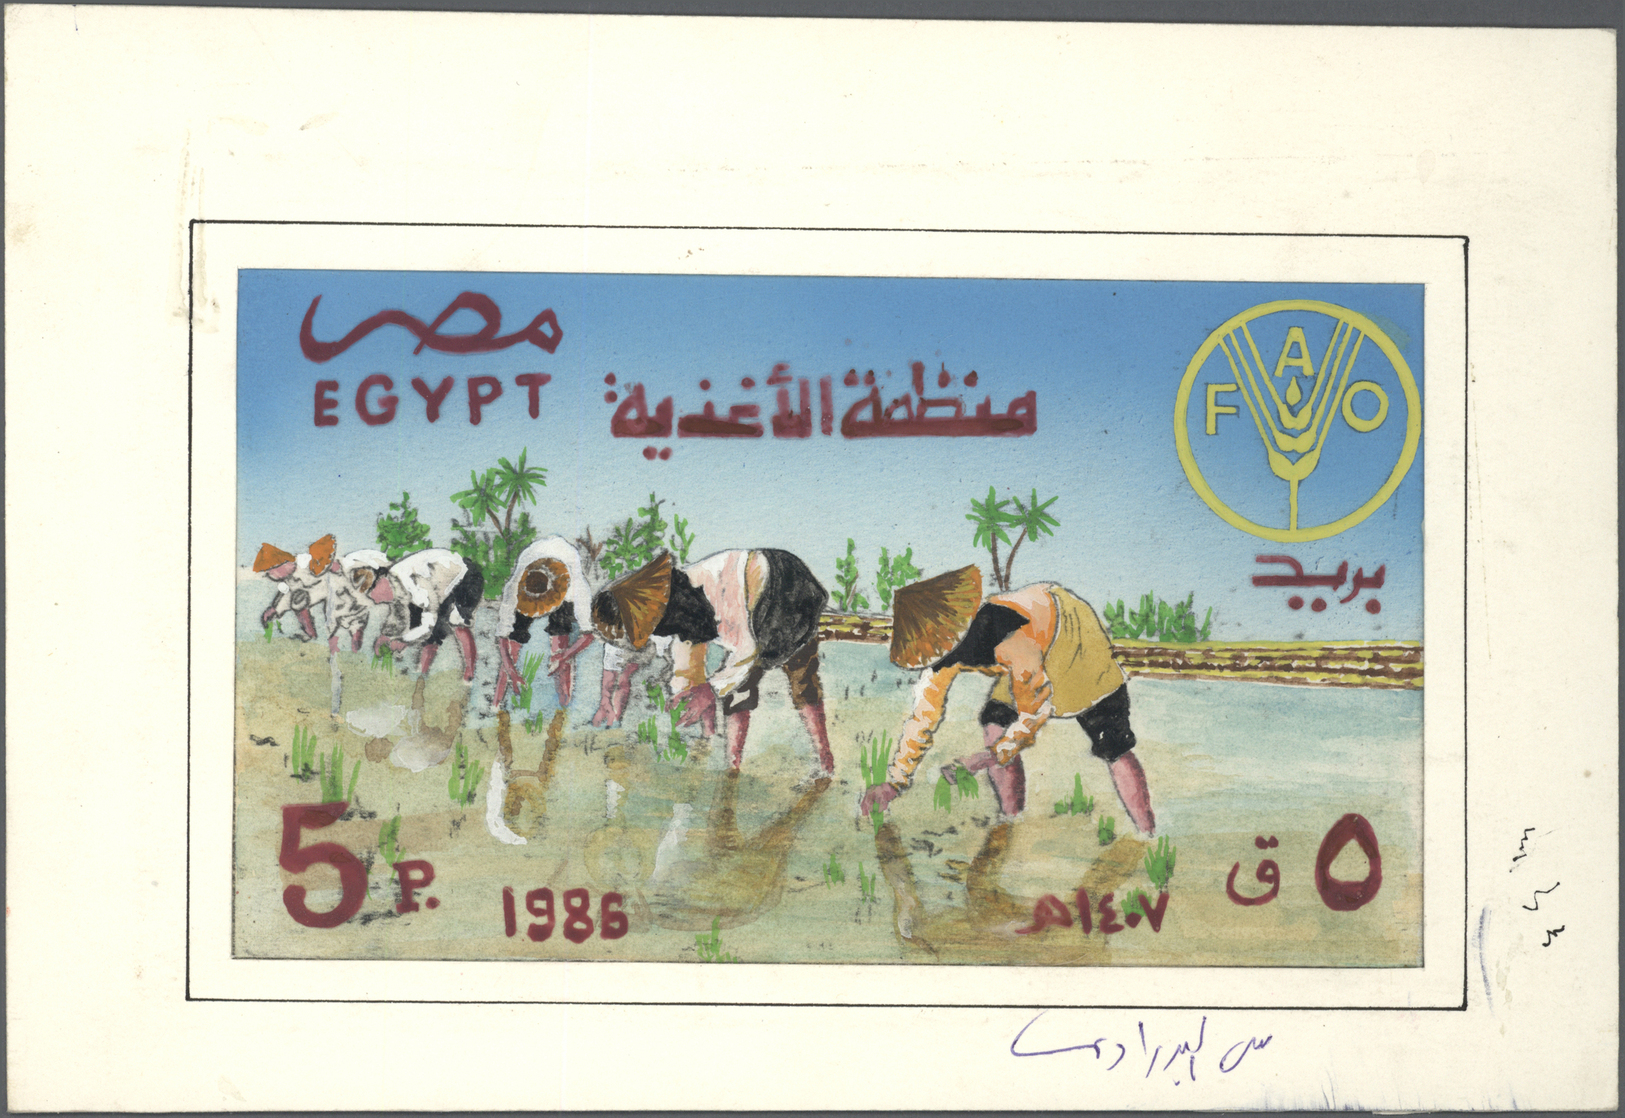 Thematik: Nahrung / Food: 1986, Egypt. Artist's Drawing For A Non-adopted Design For The Issue WORLD FOOD DAY (FAO) Show - Food